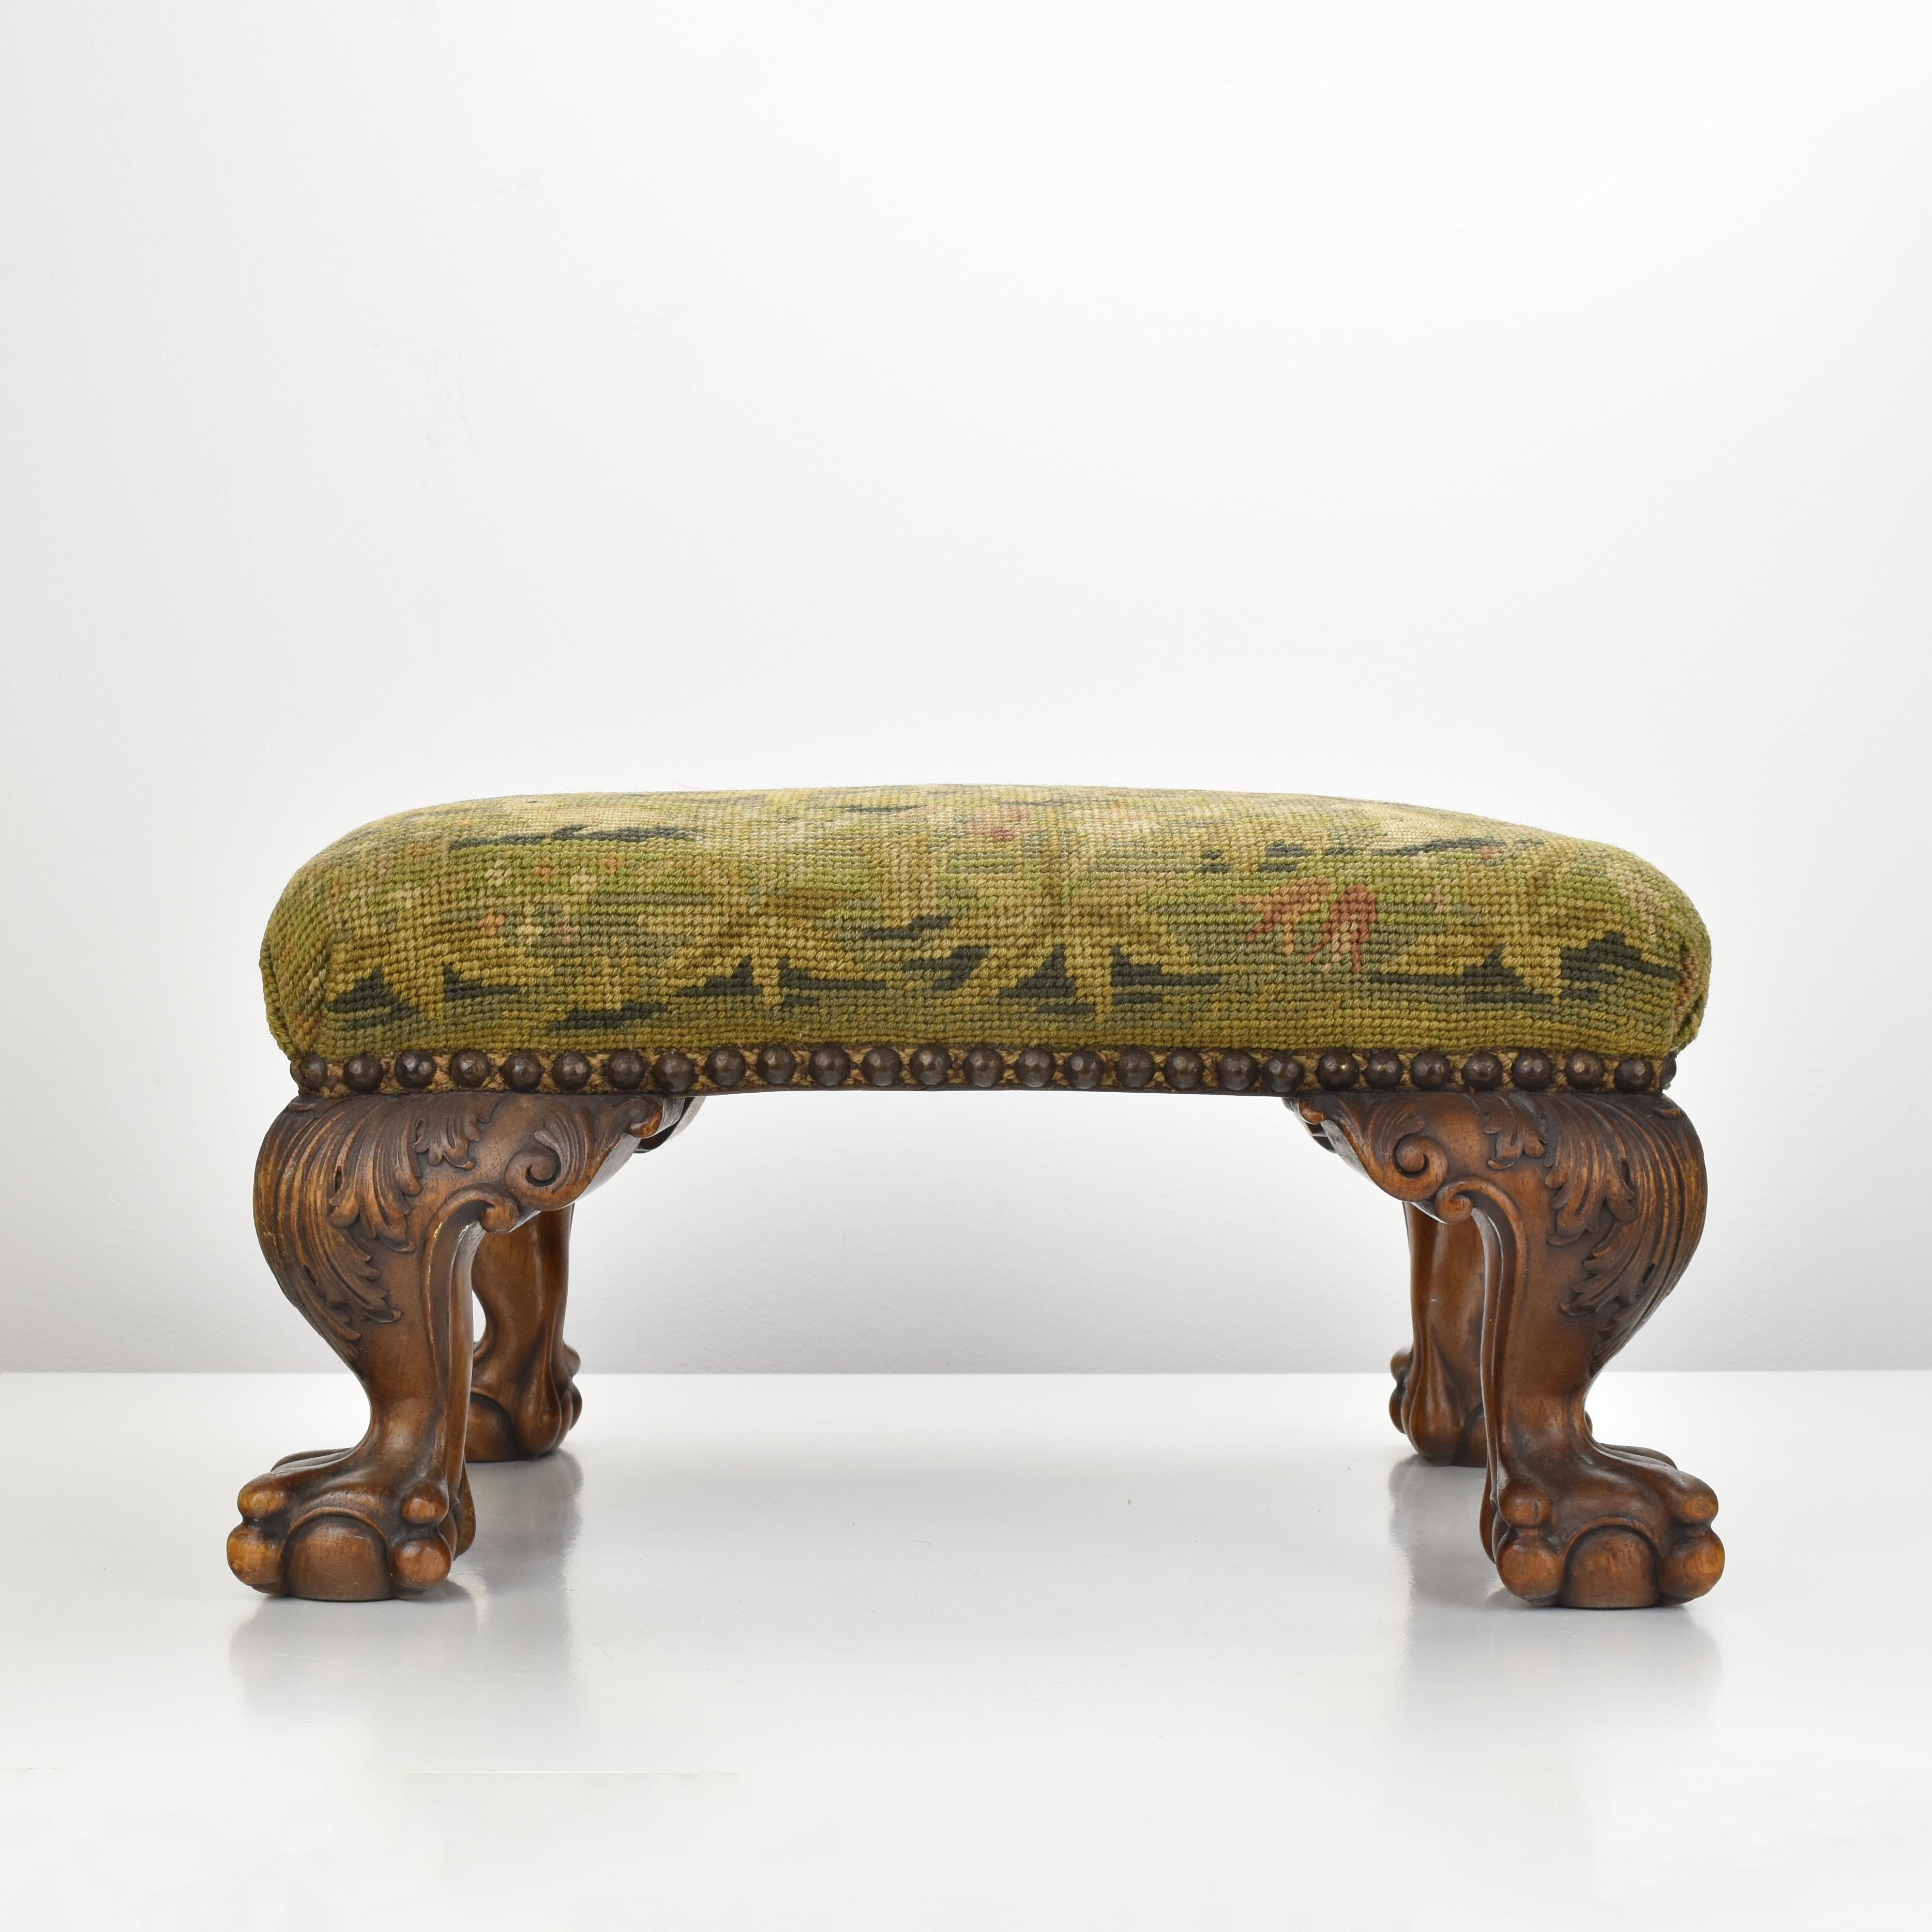 Hand-Woven Victorian Aubusson Needlework Footstool Claw & Ball Carved Wood Foot Bench For Sale